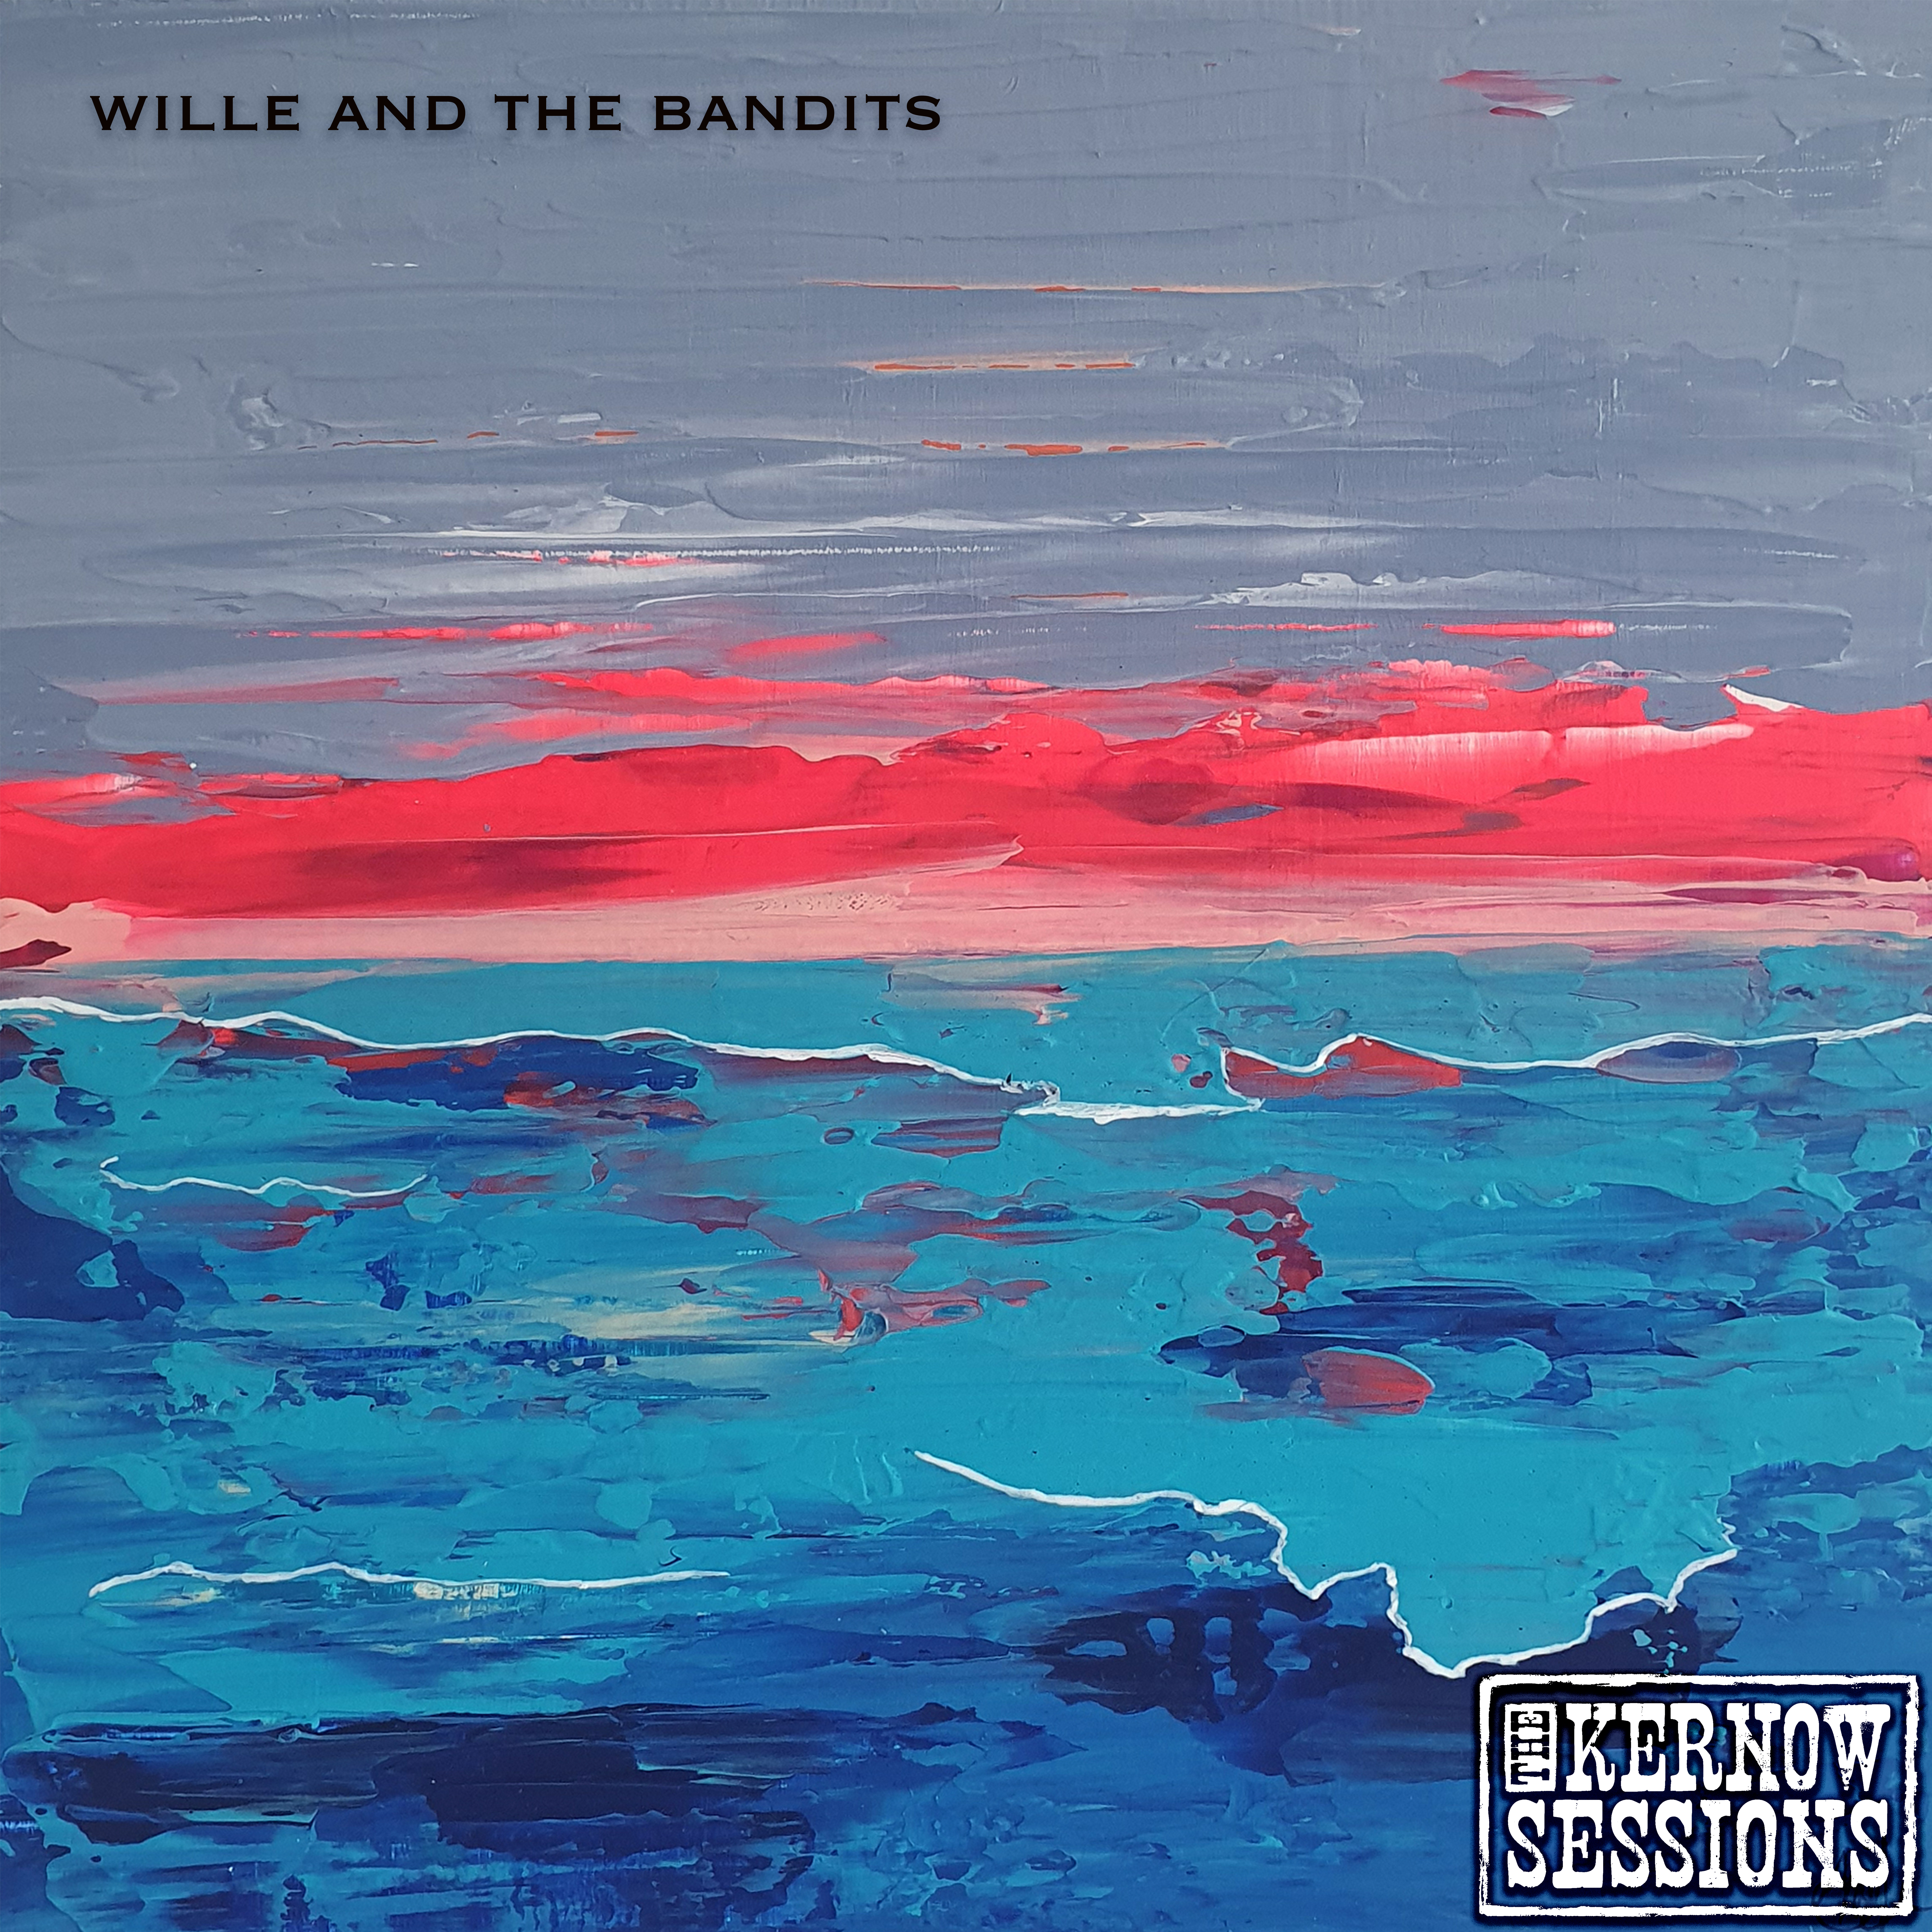 Kernow Sessions | Digital Download - Wille and the Bandits